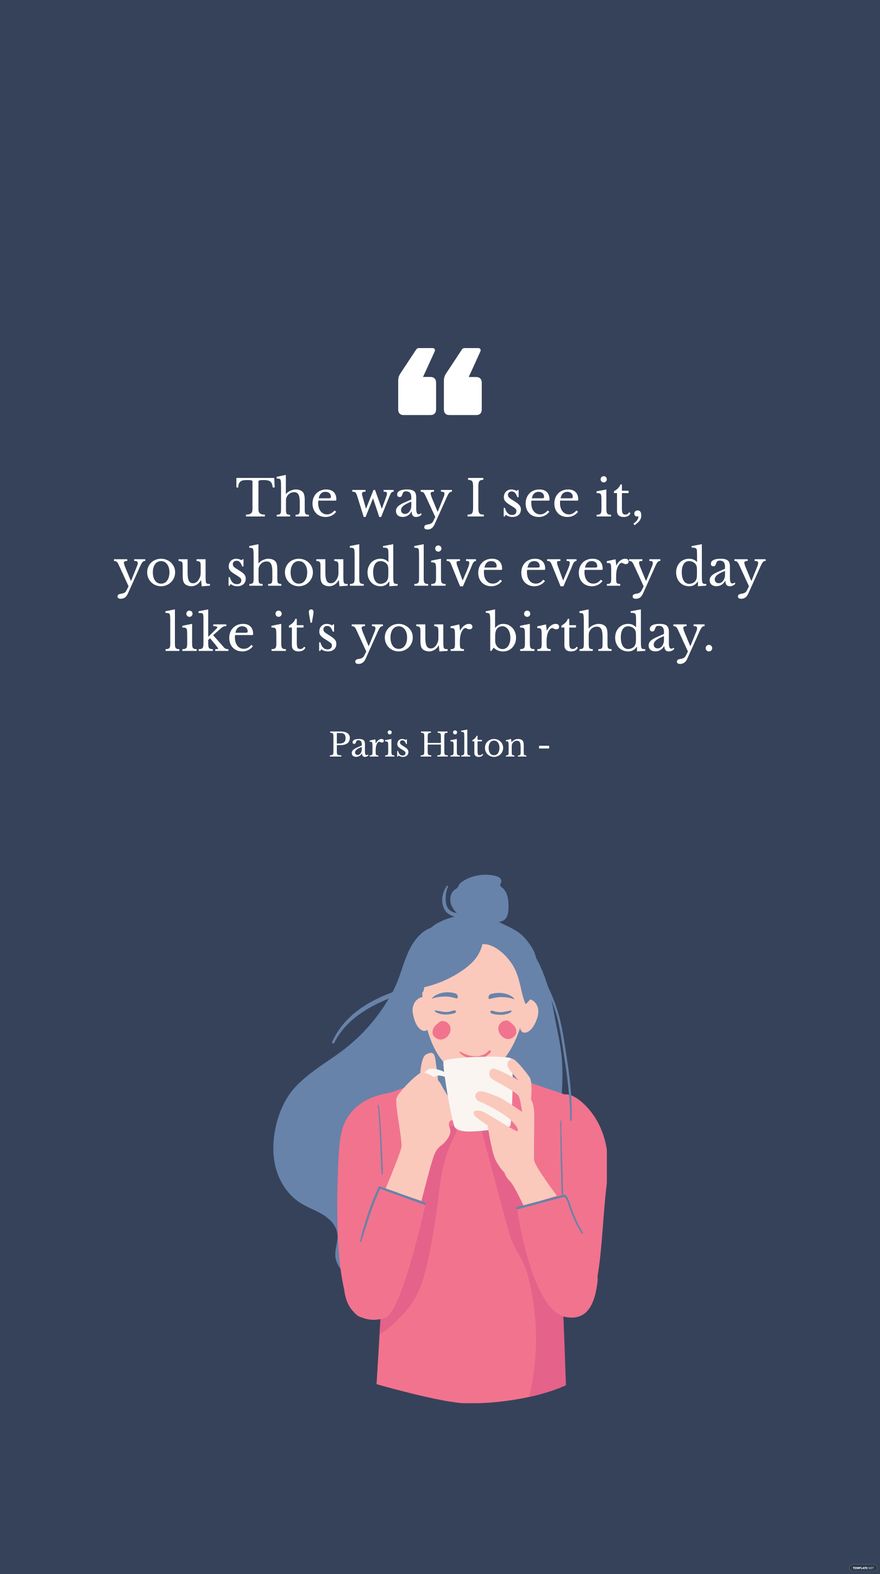 Paris Hilton - The way I see it, you should live every day like it's your birthday.